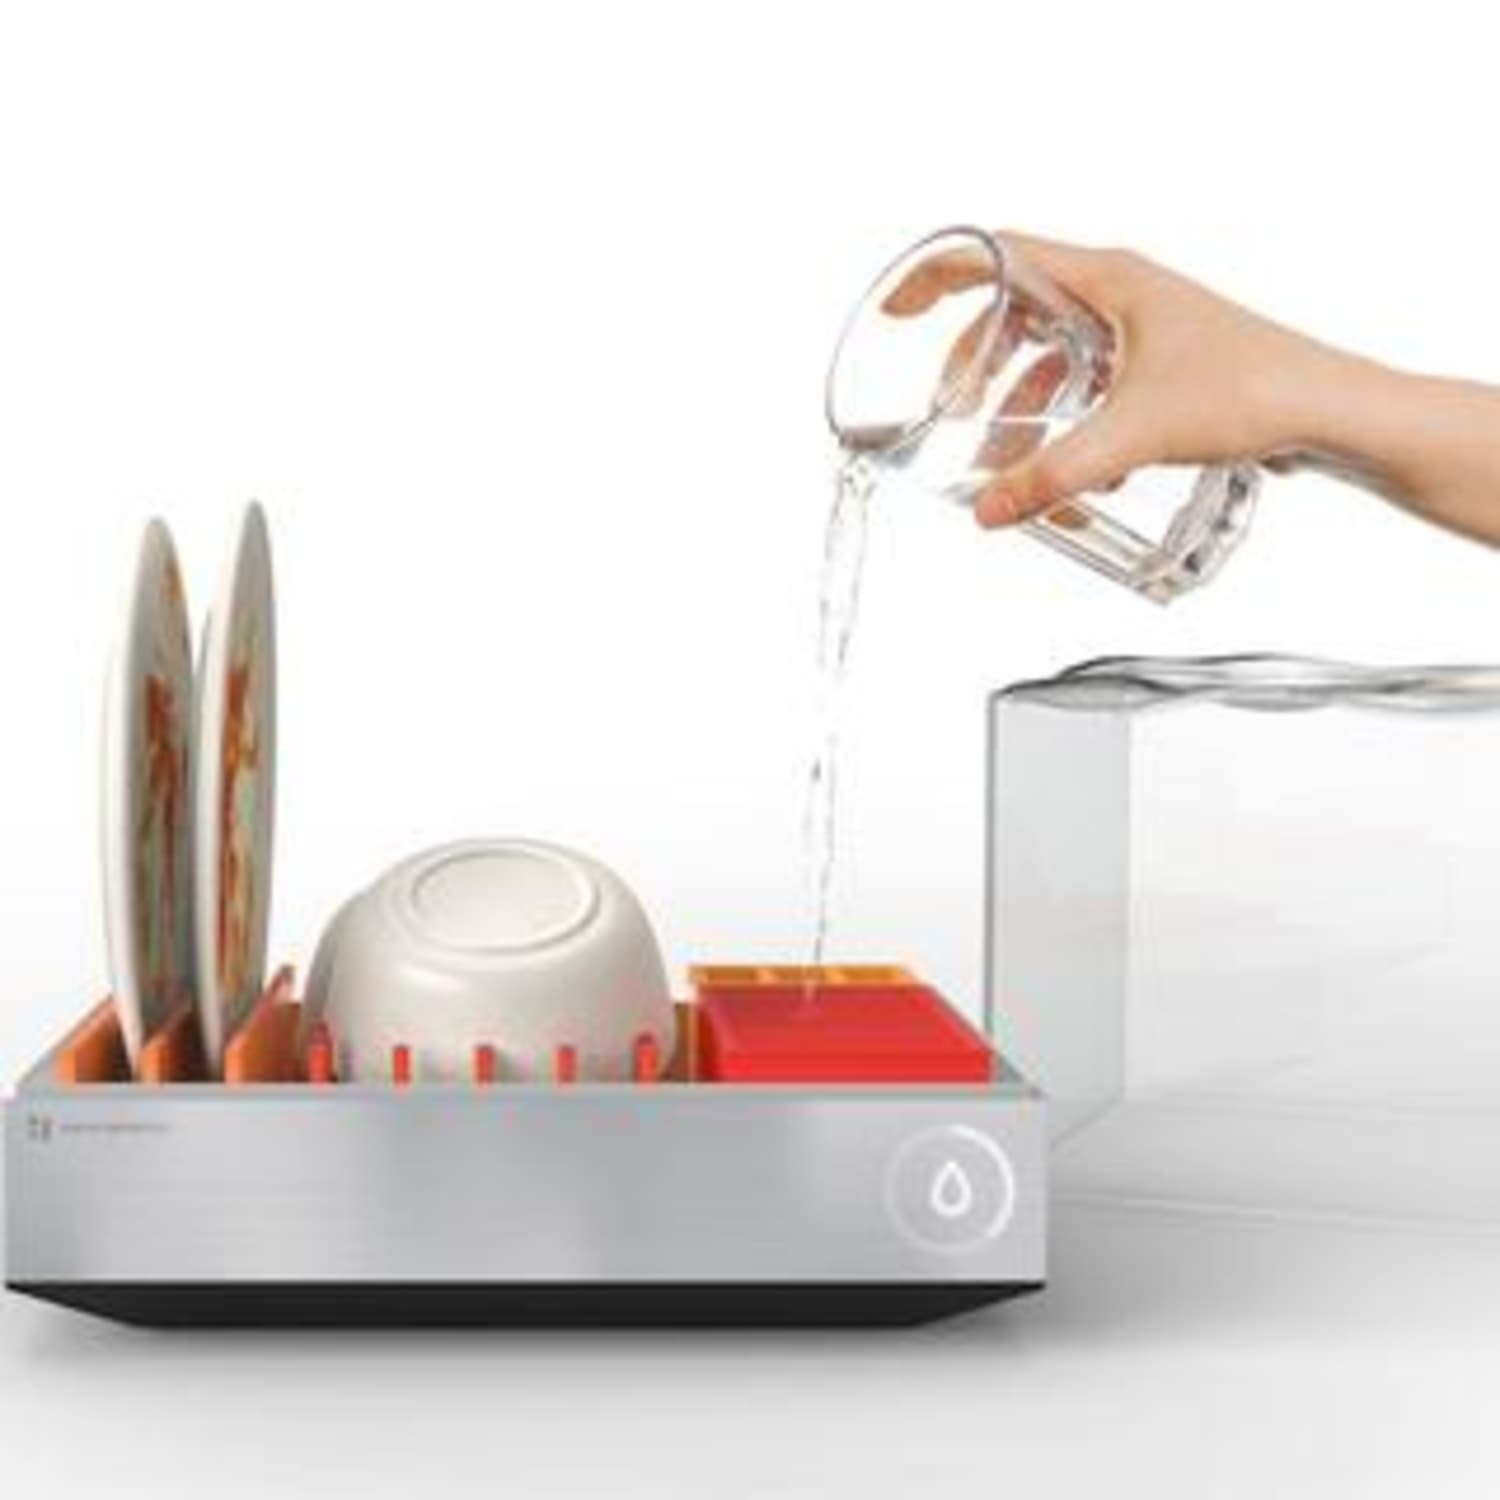 compact portable dishwasher